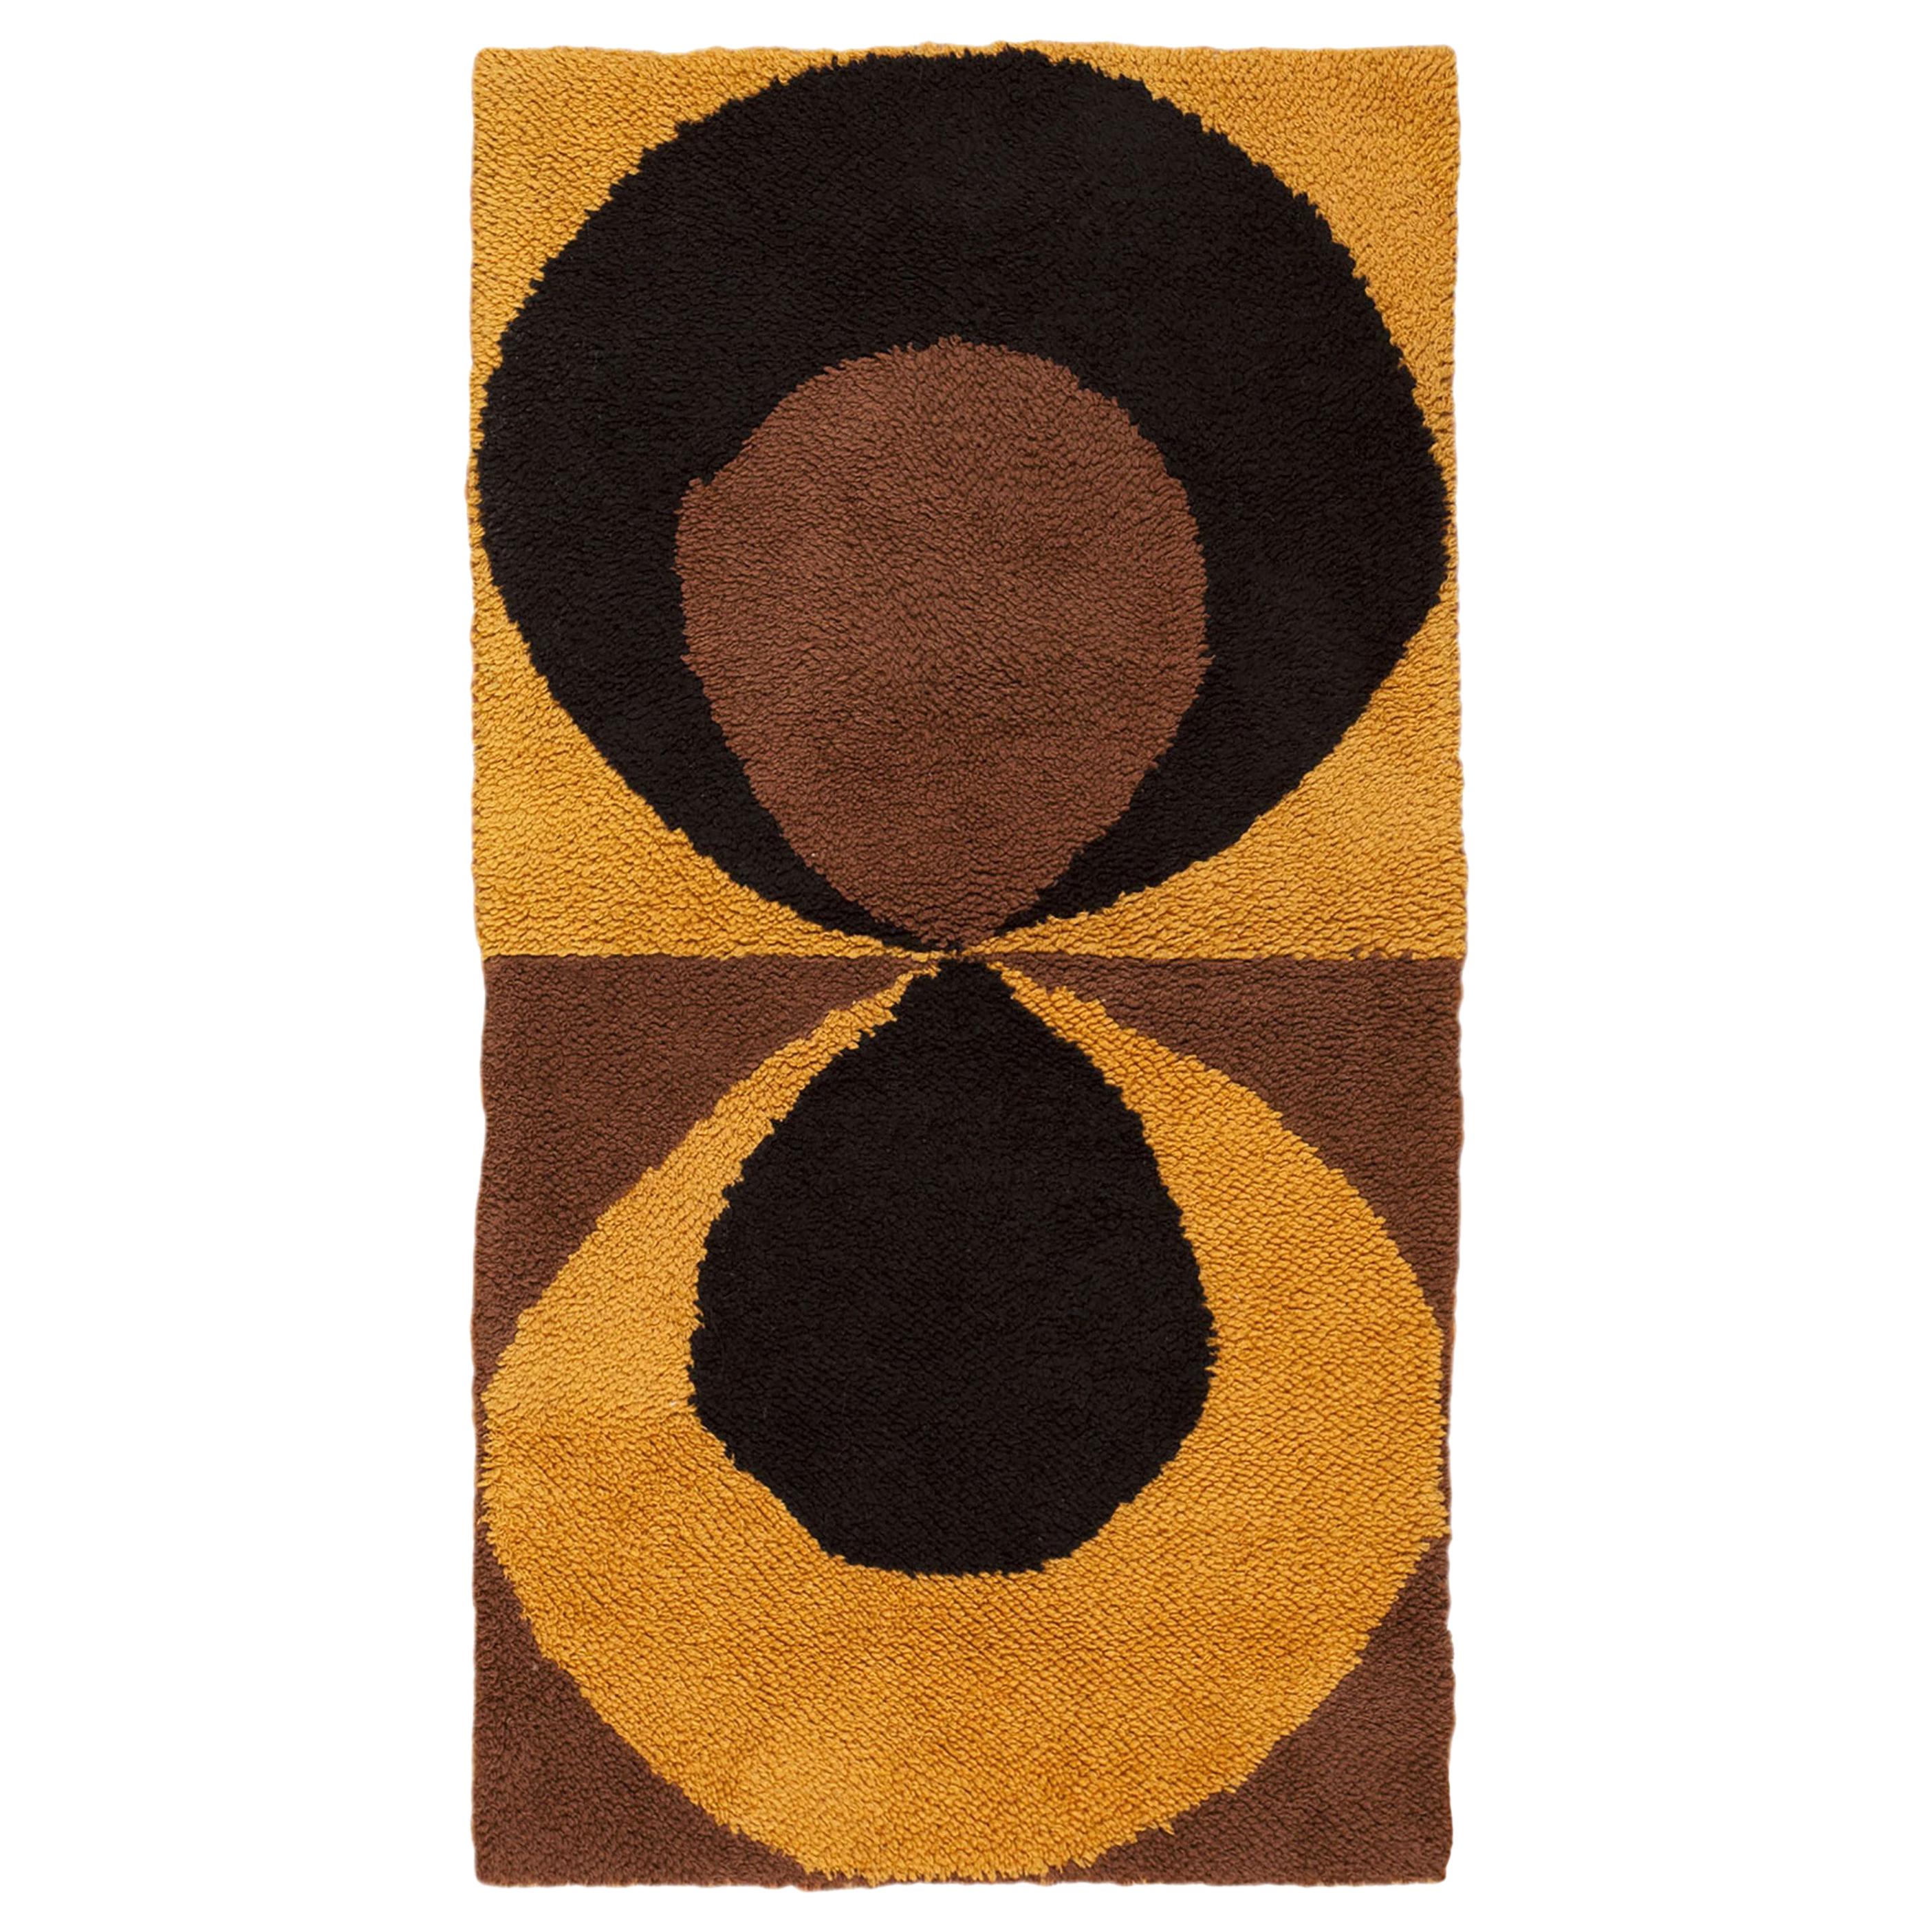 Tapis suédois vintage. Taille : 3 ft x 5 ft 5 in 